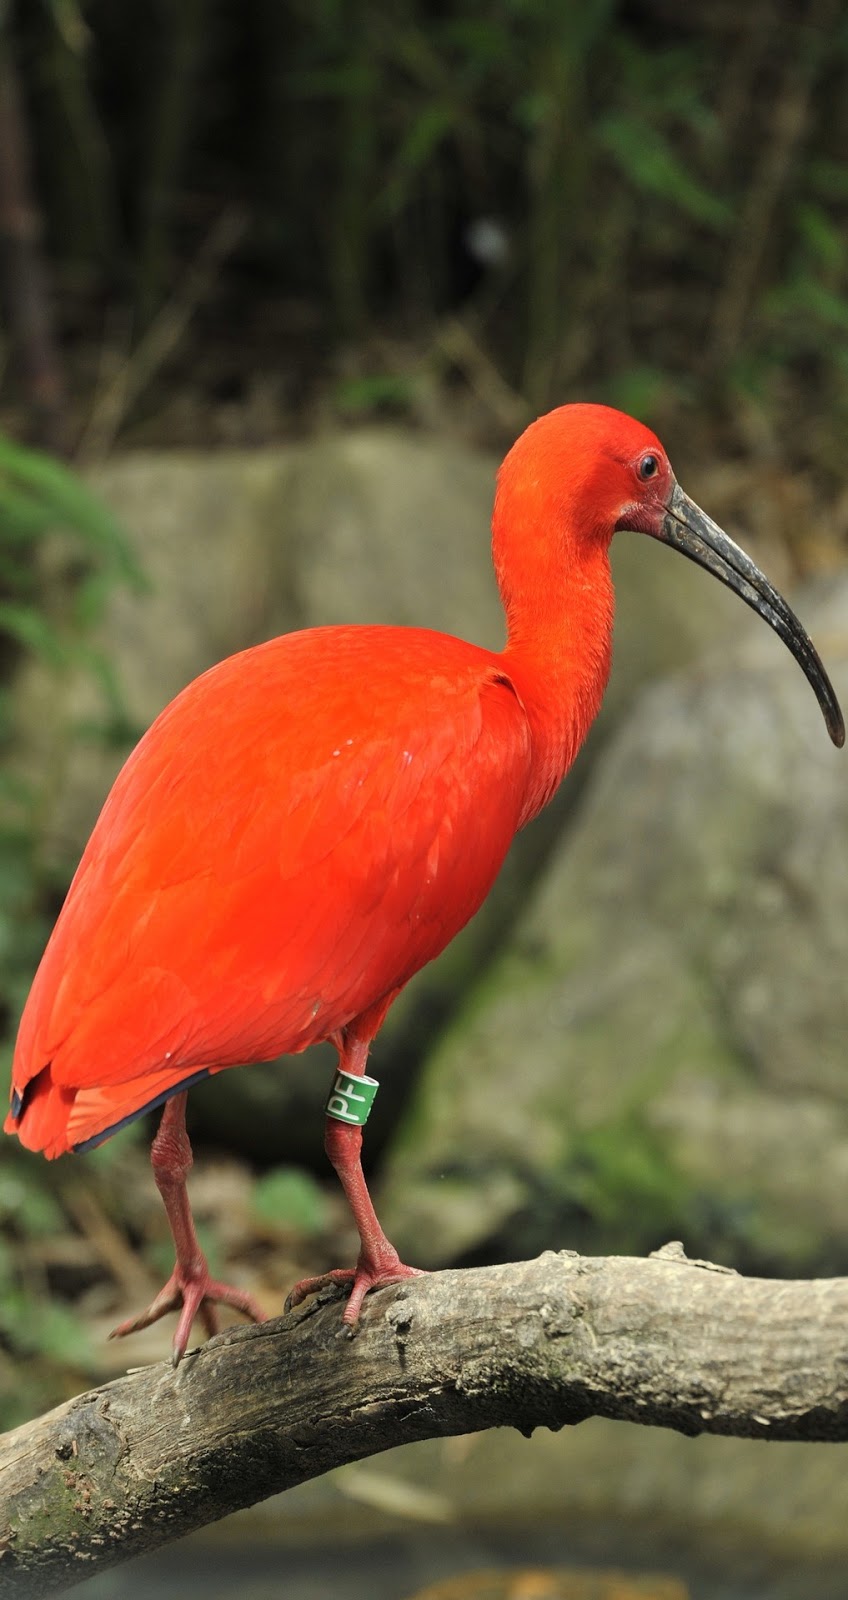 Picture of a scarlet ibis.